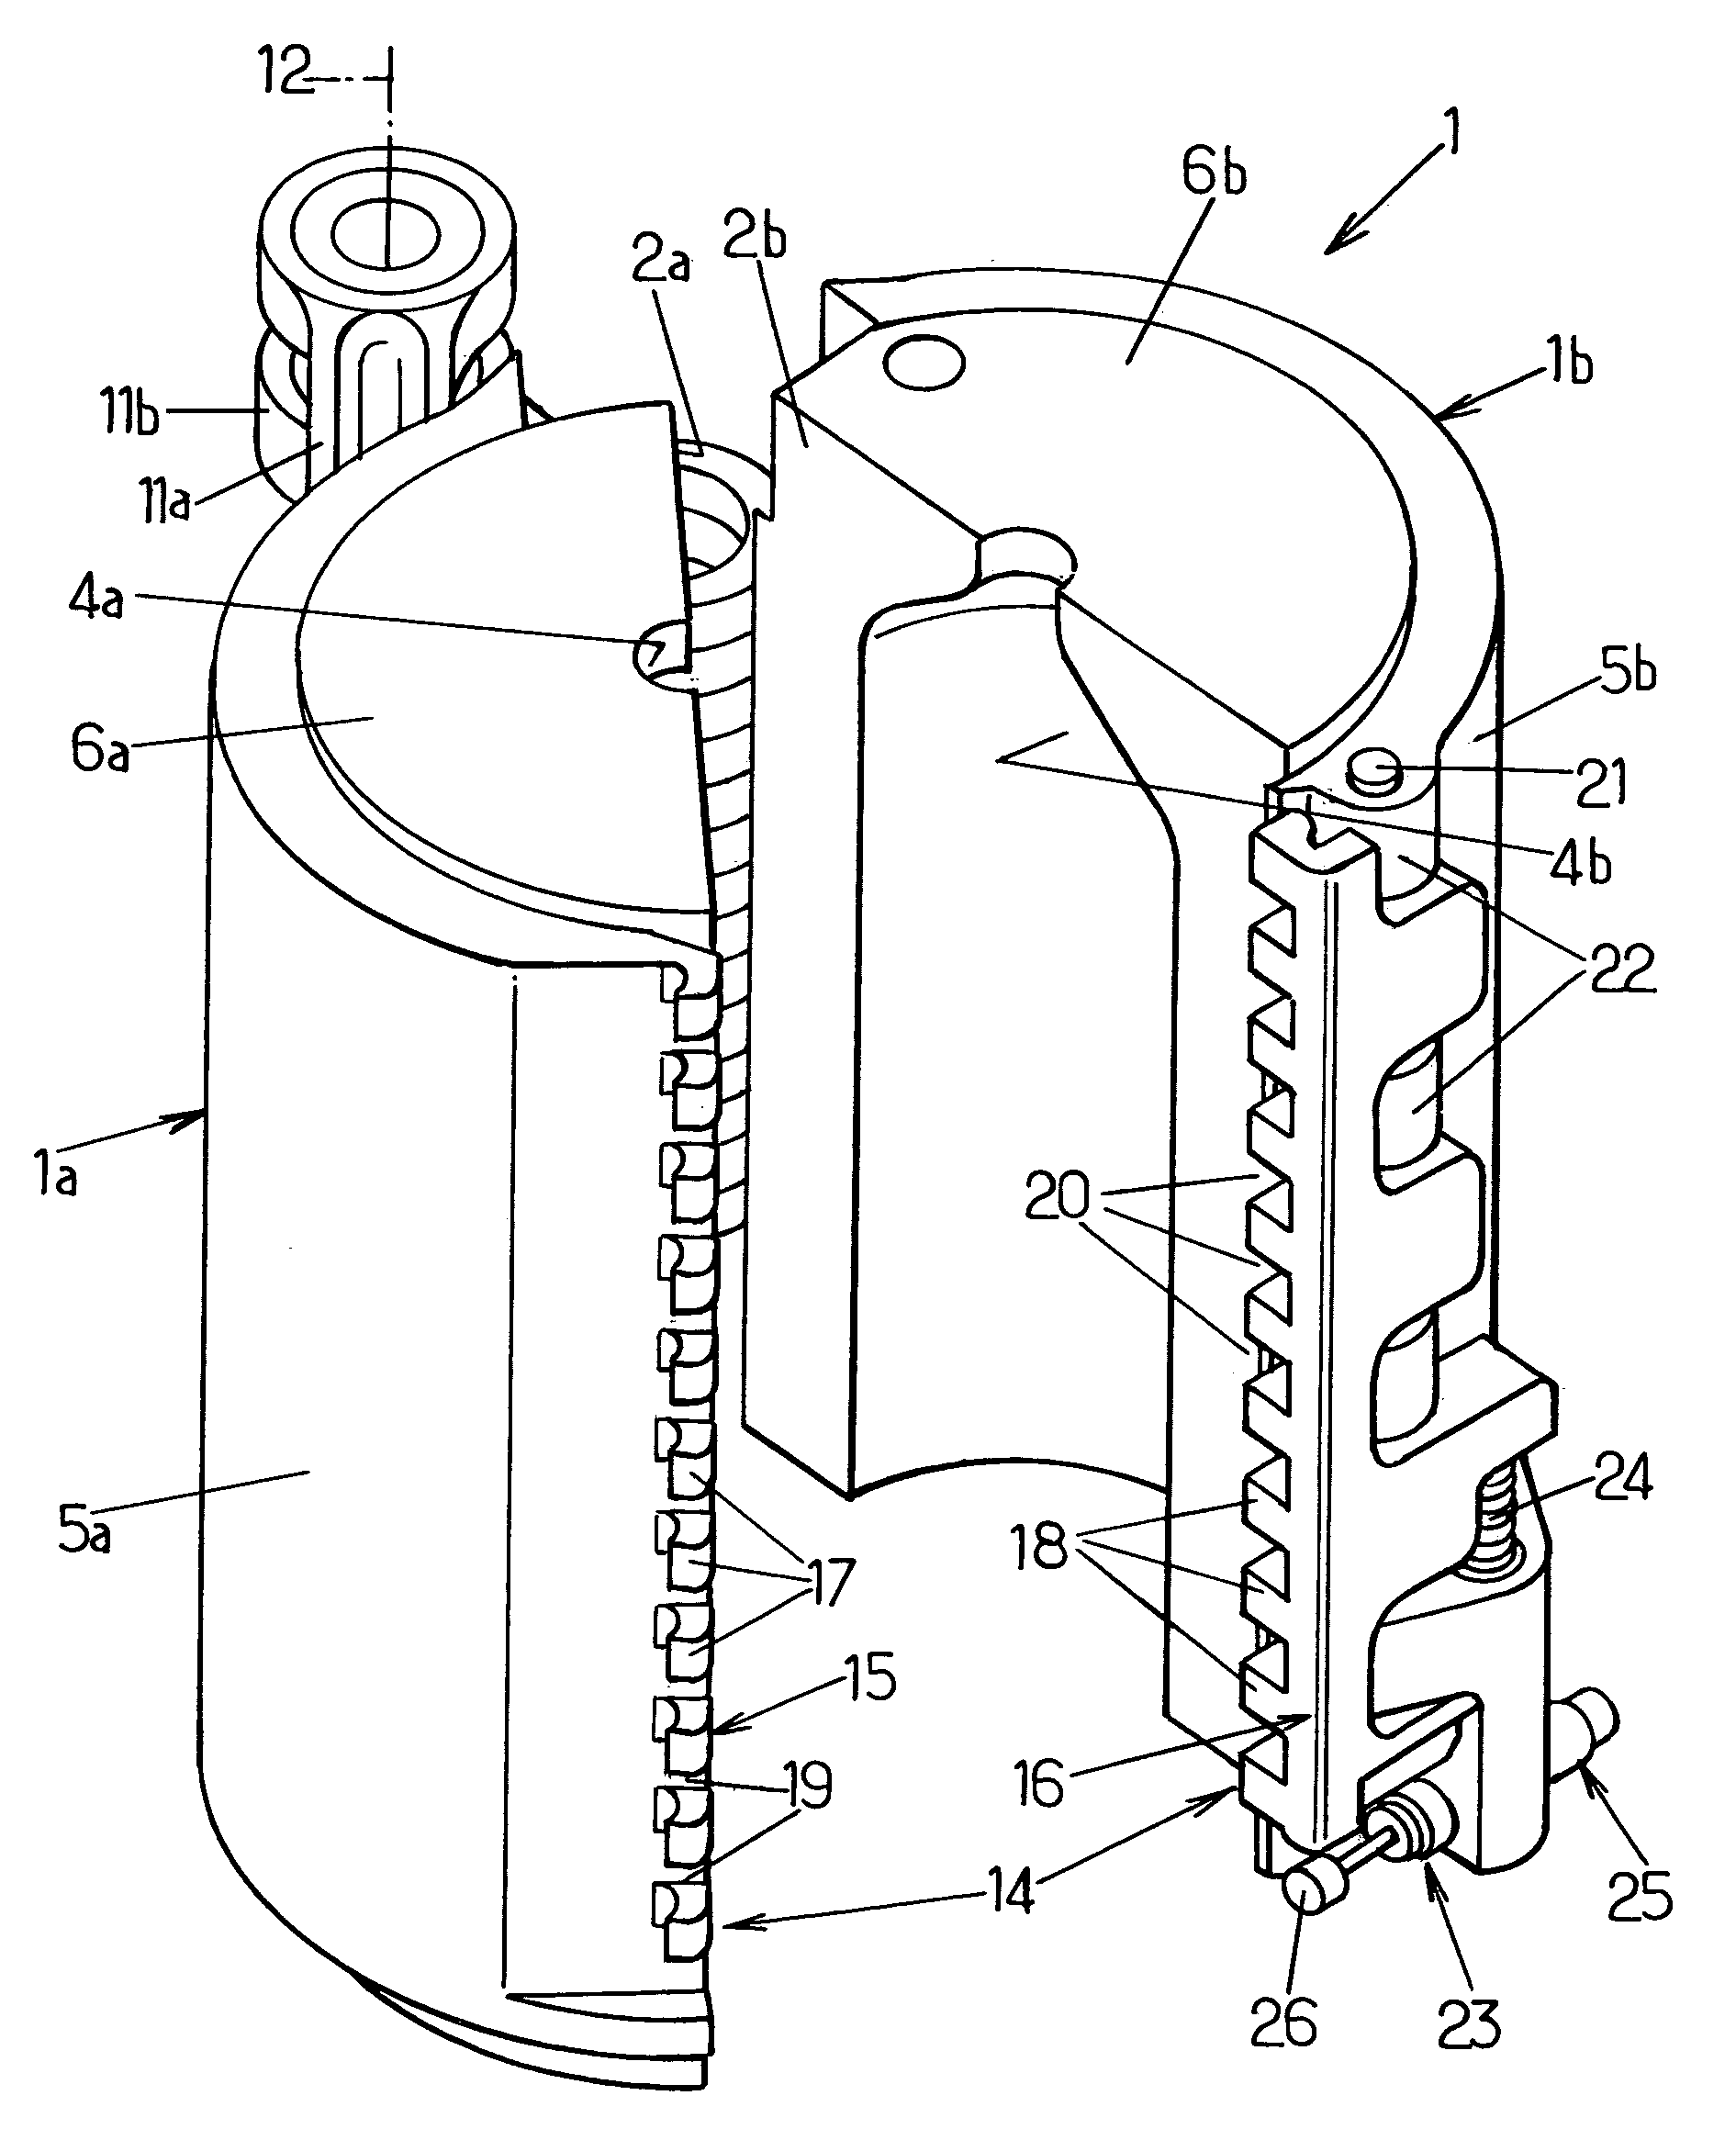 Molding device for the production of containers in thermoplastic material